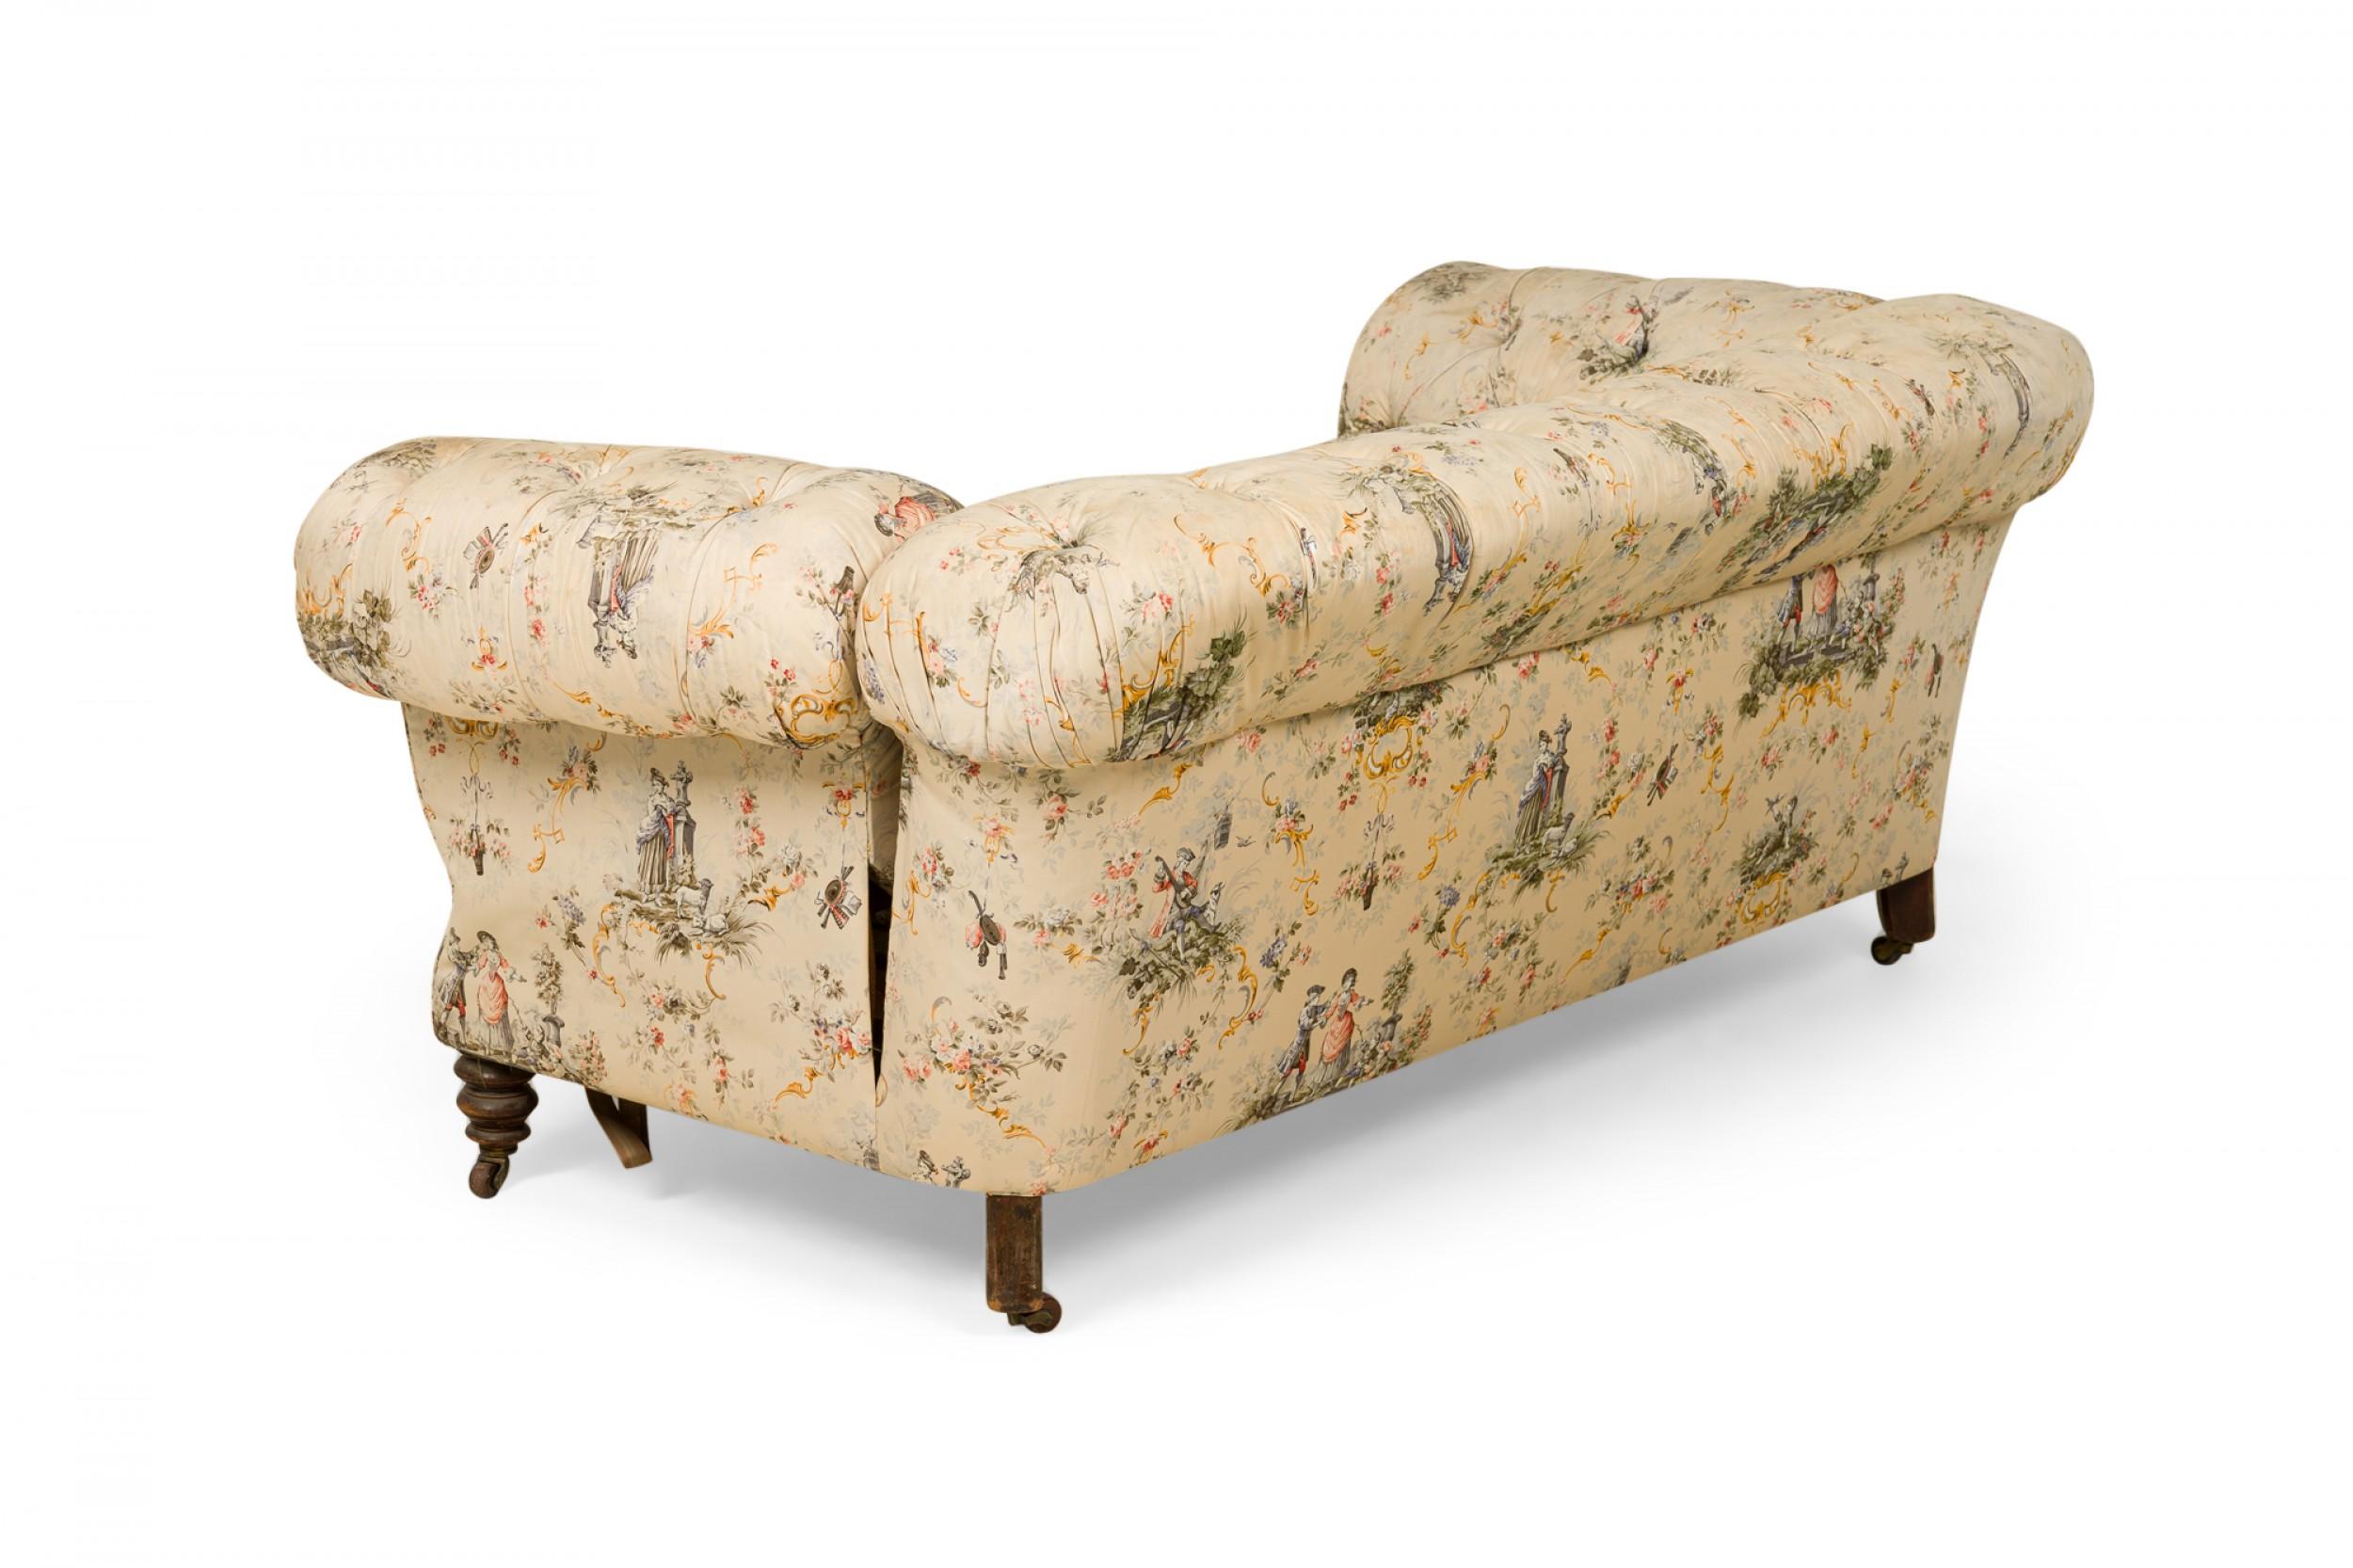 20th Century French Victorian Style Toile Print Beige Tufted Upholstered Loveseat